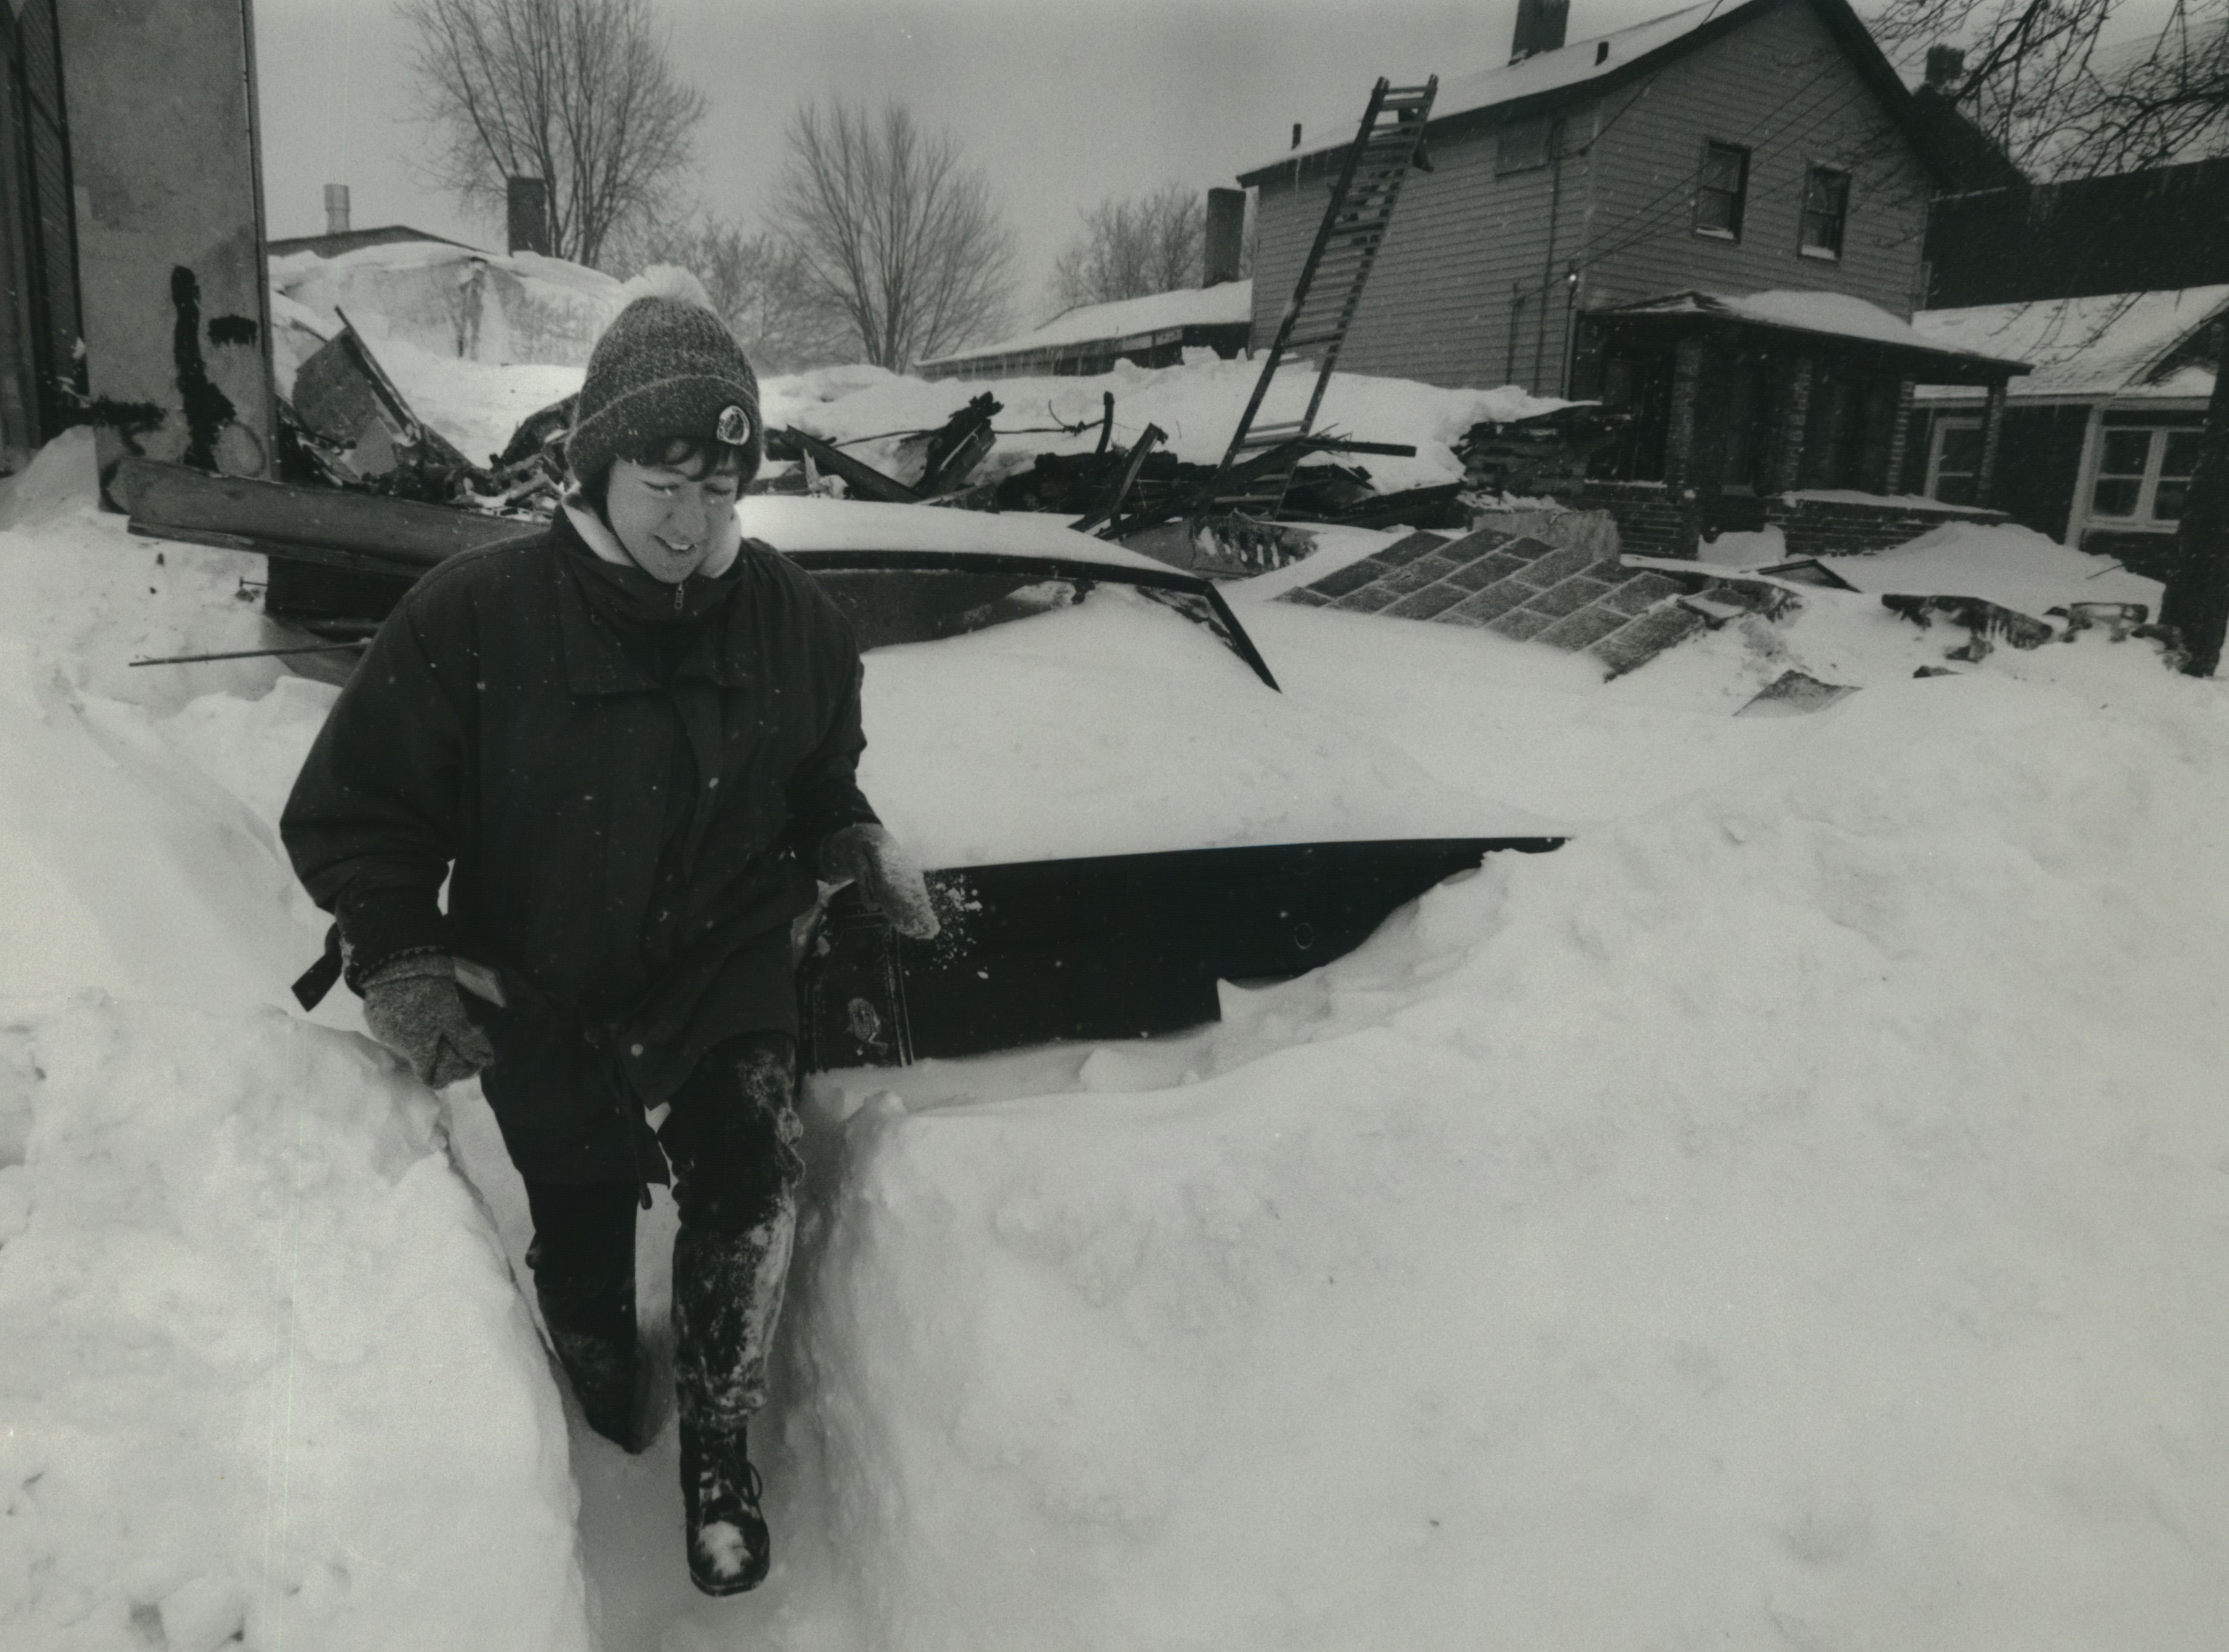 Post-Standard Reporter Jackie Arnold going through snow banks after interviewing people about building collapse in the background at 308 Marcellus Street, Syracuse.